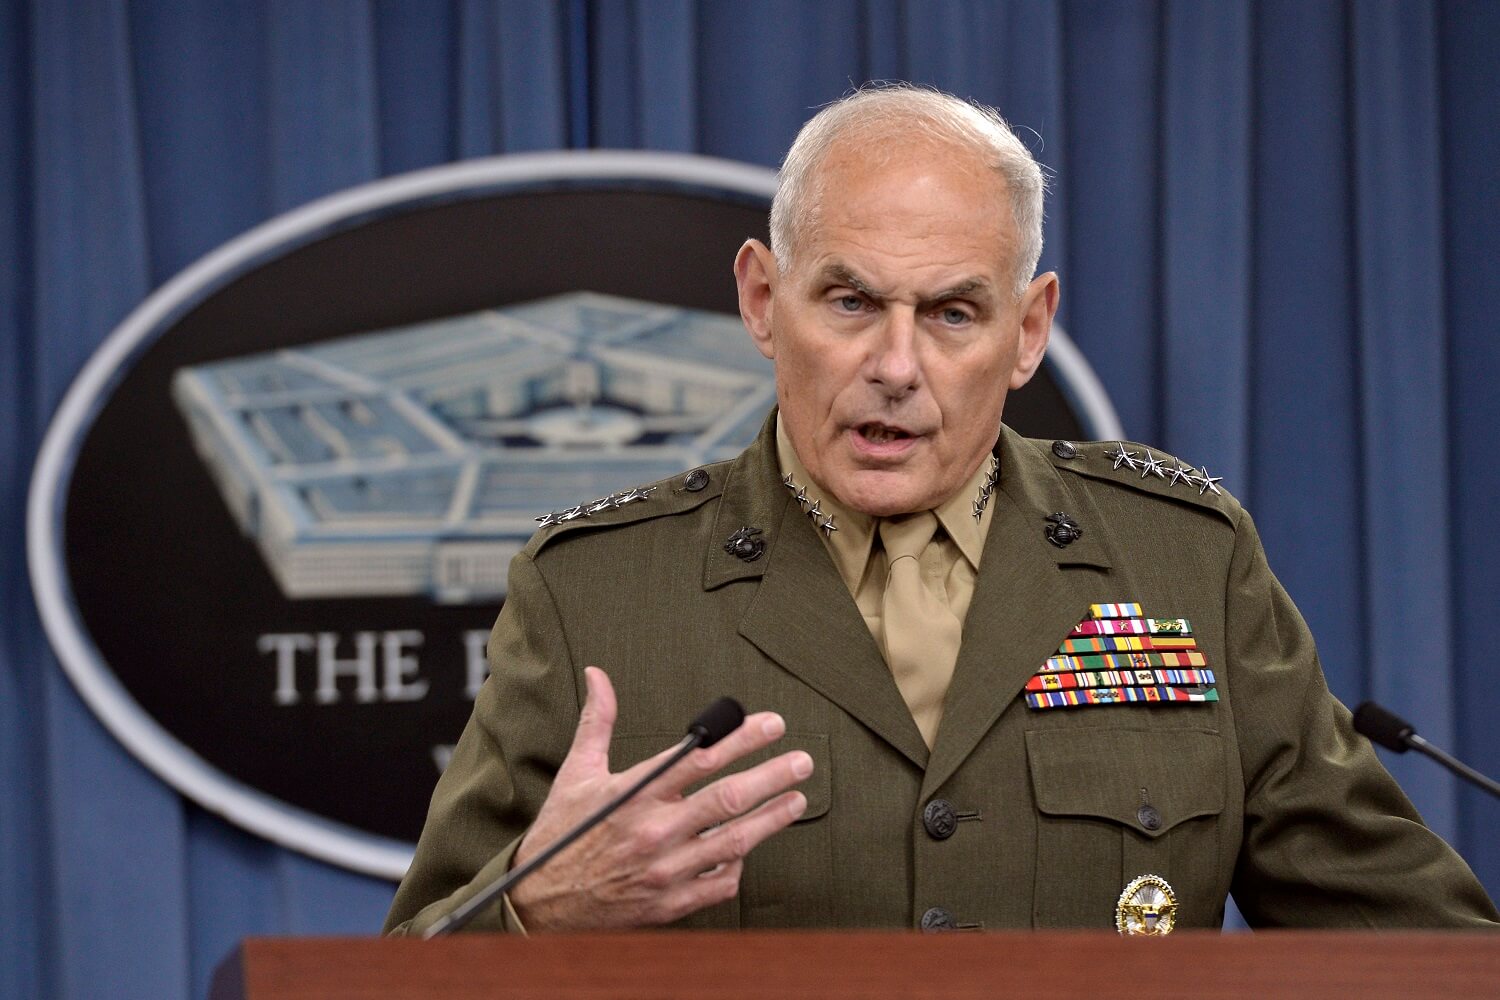 U.S. Southern Command Commander Marine Corps Gen. John F. Kelly briefs the media on the latest developments in his command's efforts to stem the flow of drugs from South and Central America in the Pentagon Press Briefing Room, March 13, 2014. DoD Photo by Glenn Fawcett (Released)